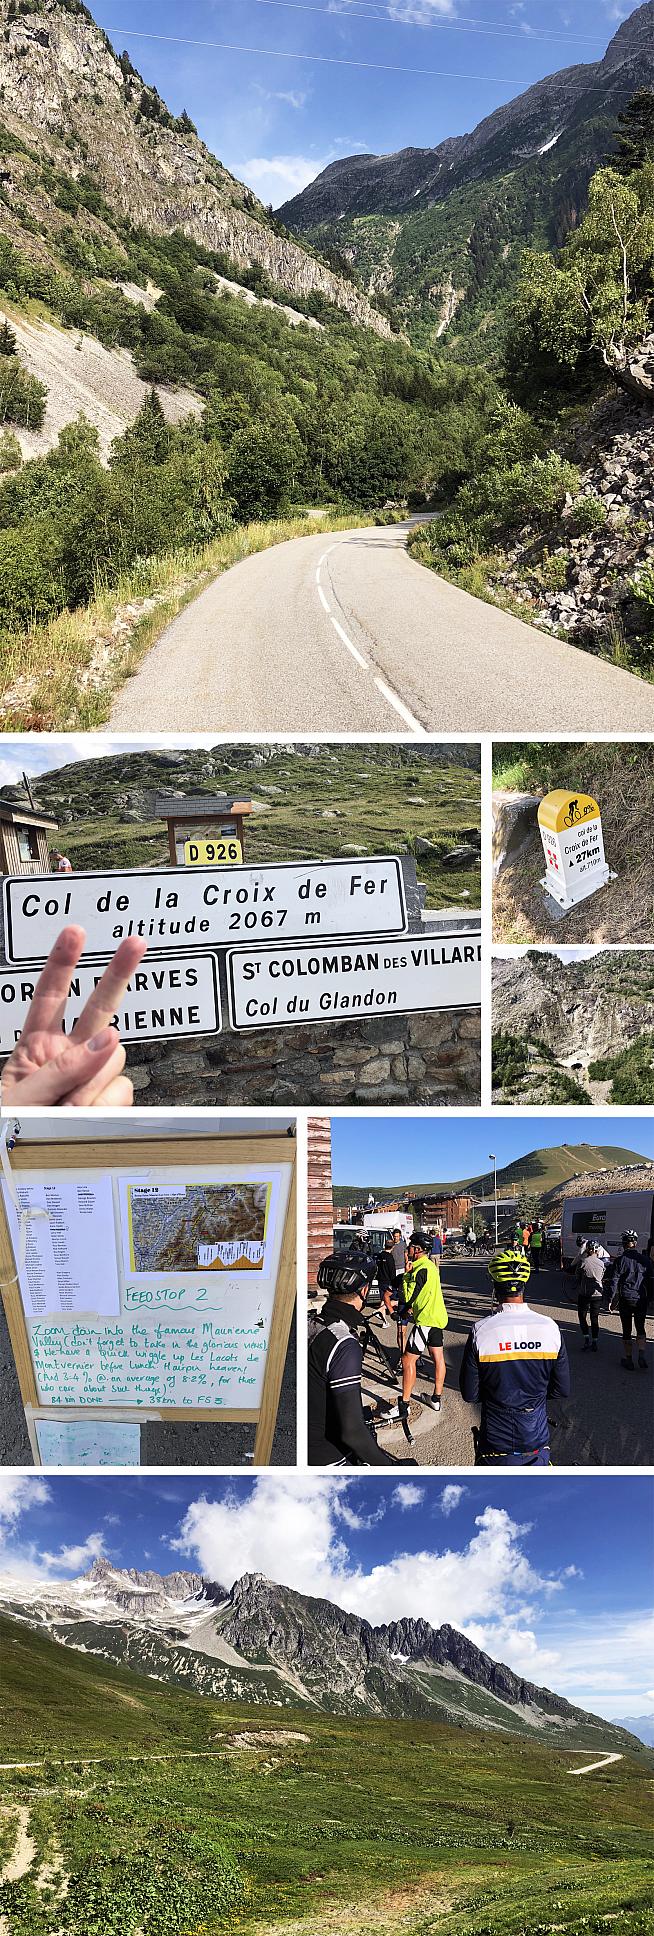 High emotions and bad altitude: impressions from Stage 12.